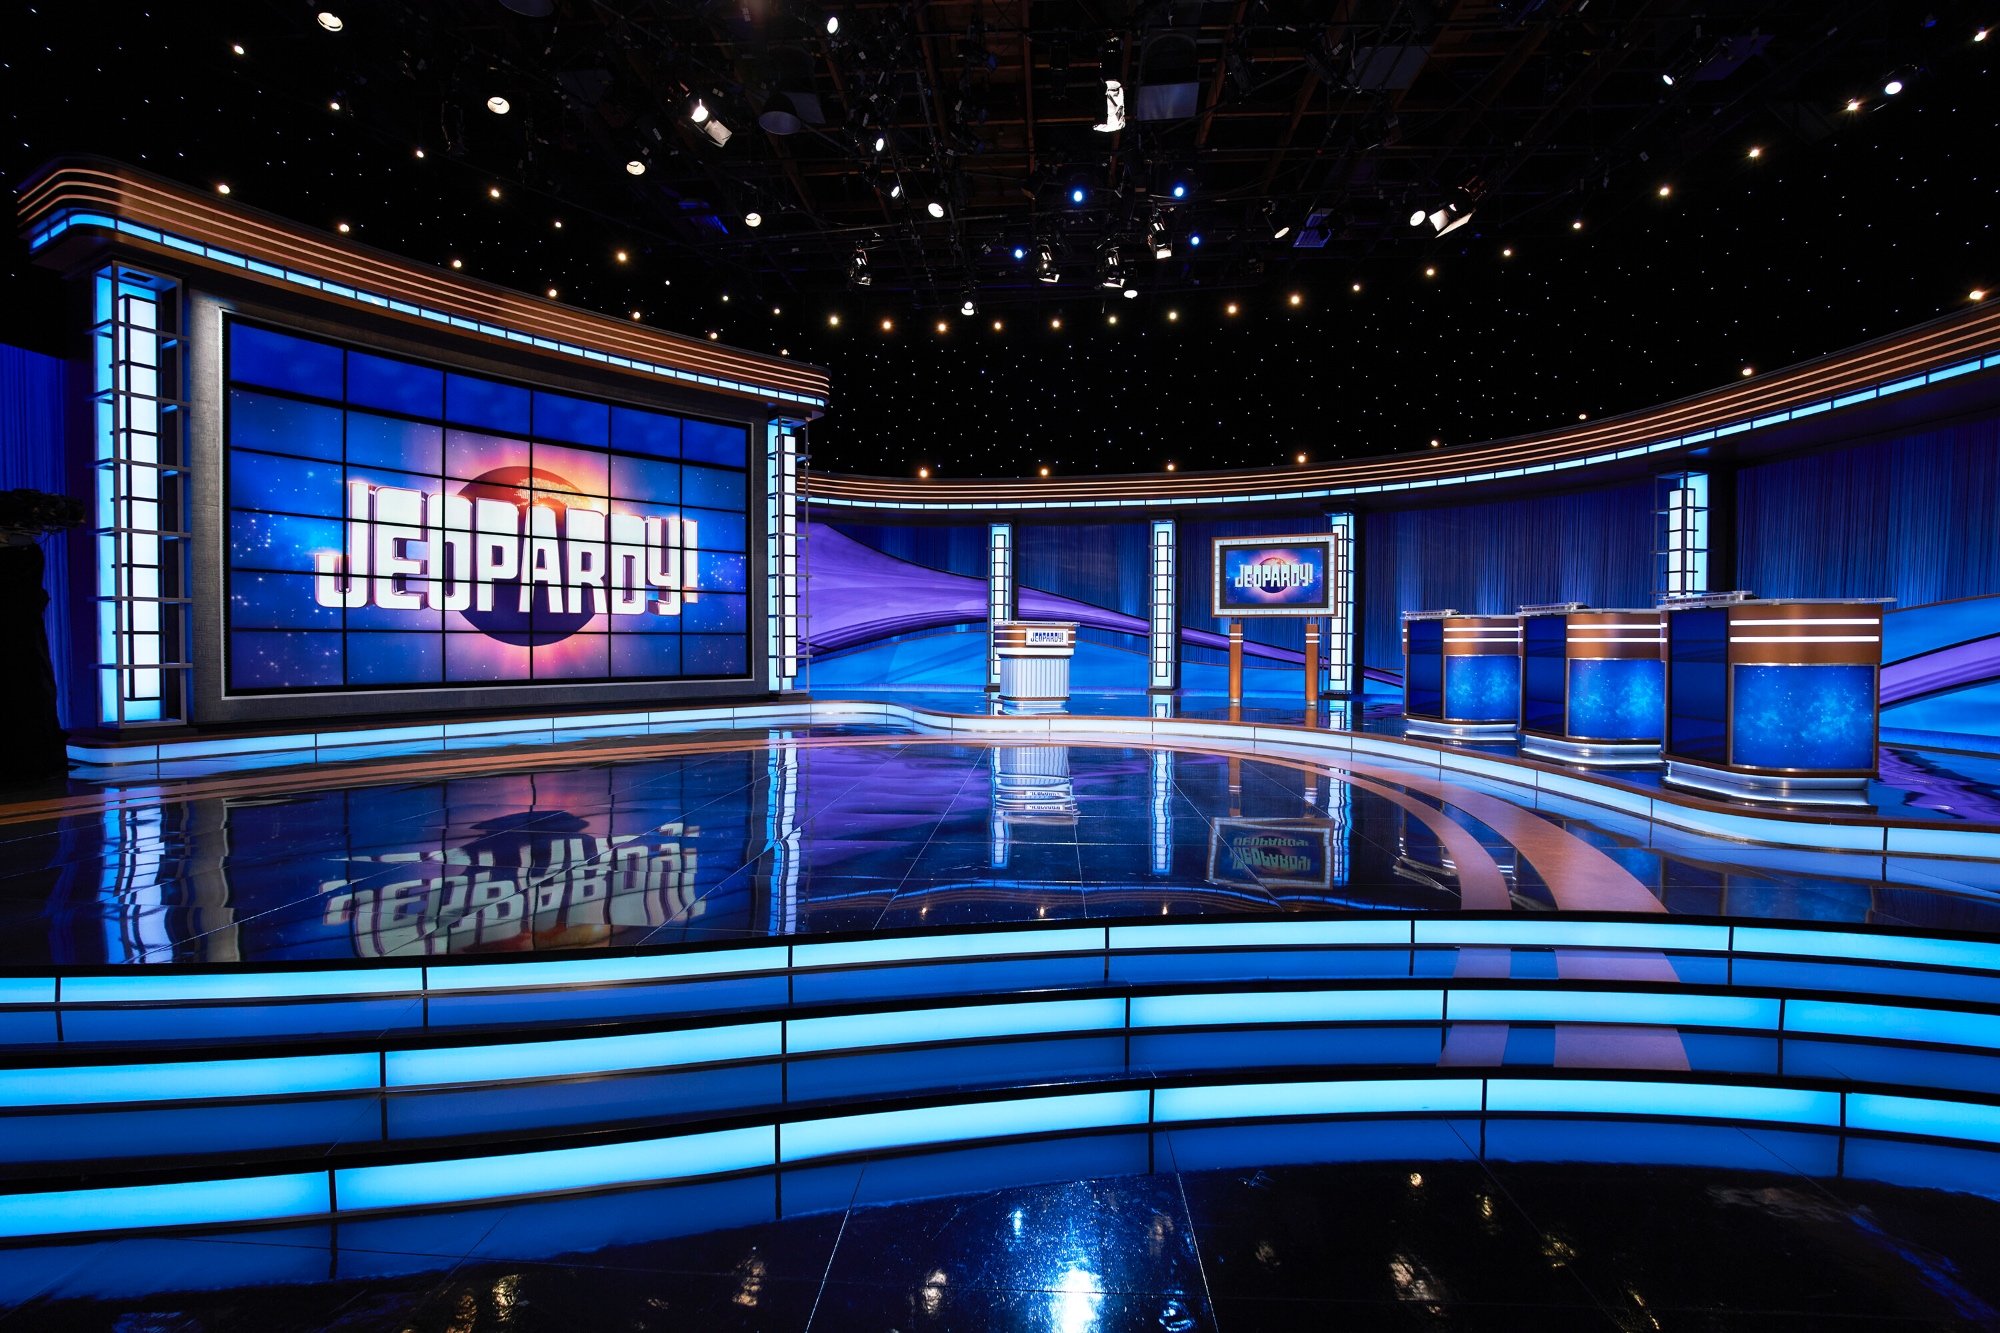 'Jeopardy!' game board in the studio. The steps leading to stage with the contestant podiums on the side.